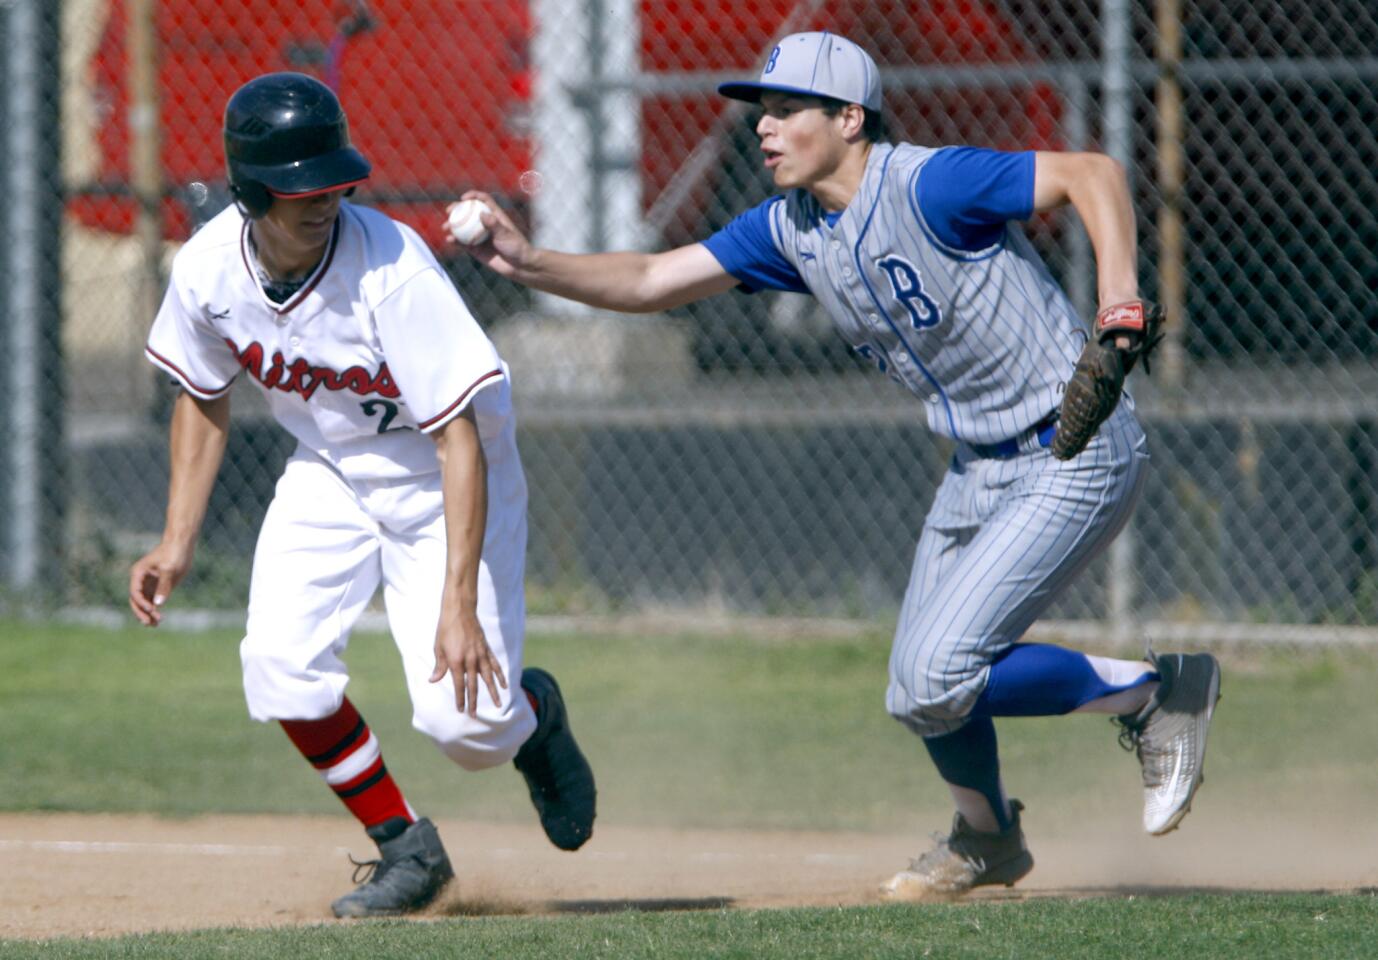 Glendale High School's #21 Armando Alvarez gets caught in a rundown between first and second base by Burbank High School pitcher #32 Lungaro (Roster had no first names, max preps only had 2 players) in home game in Glendale on Tuesday, April 4, 2017.